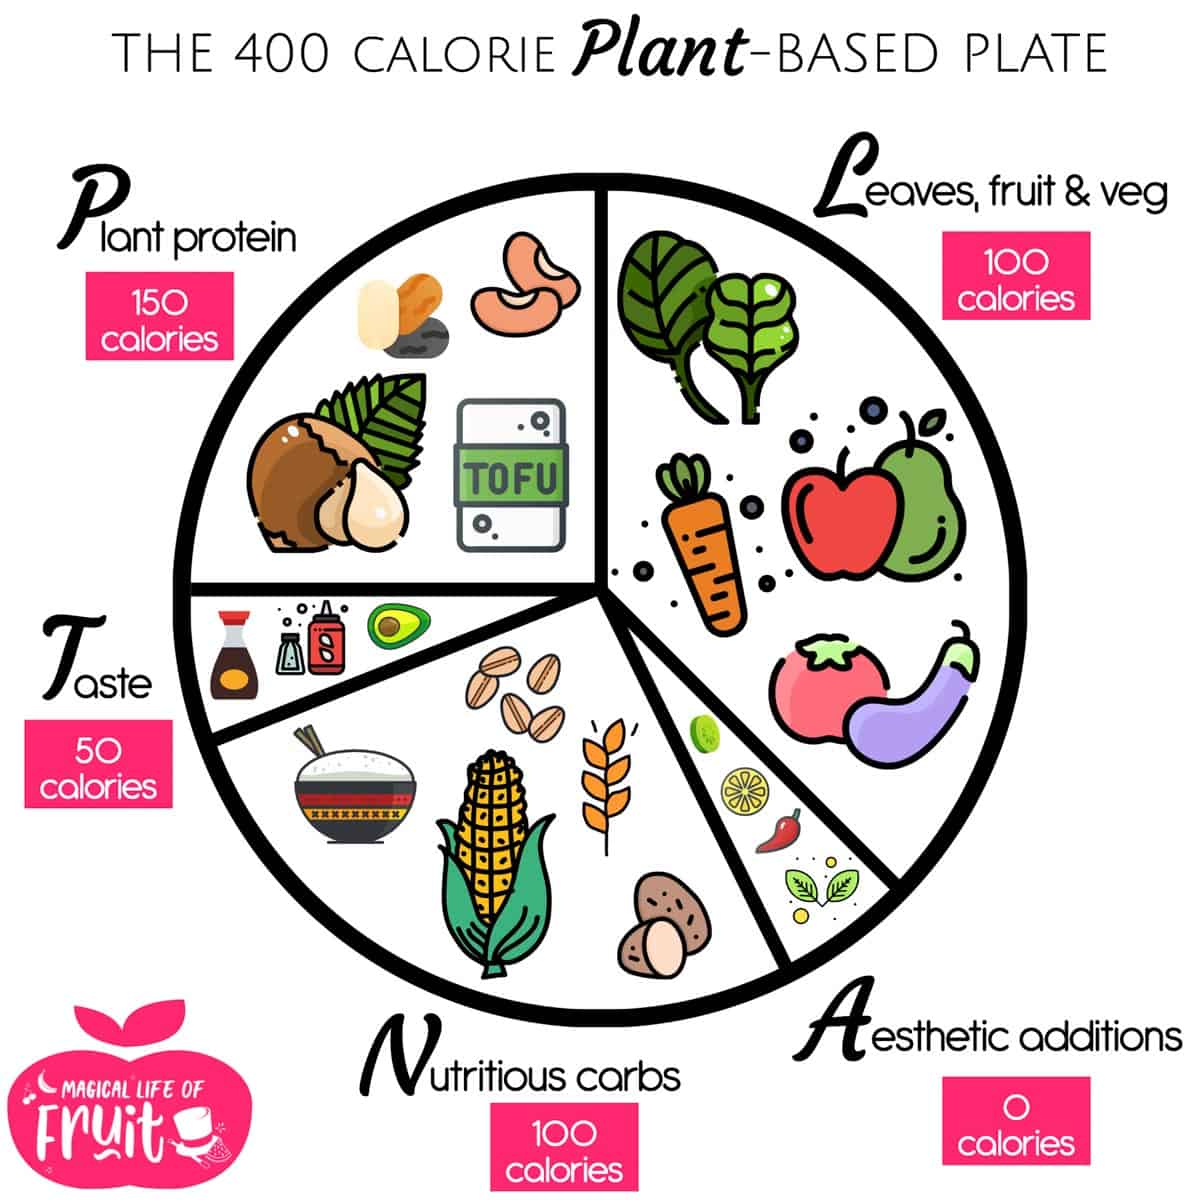 The 400 Calorie Plant Based Plate